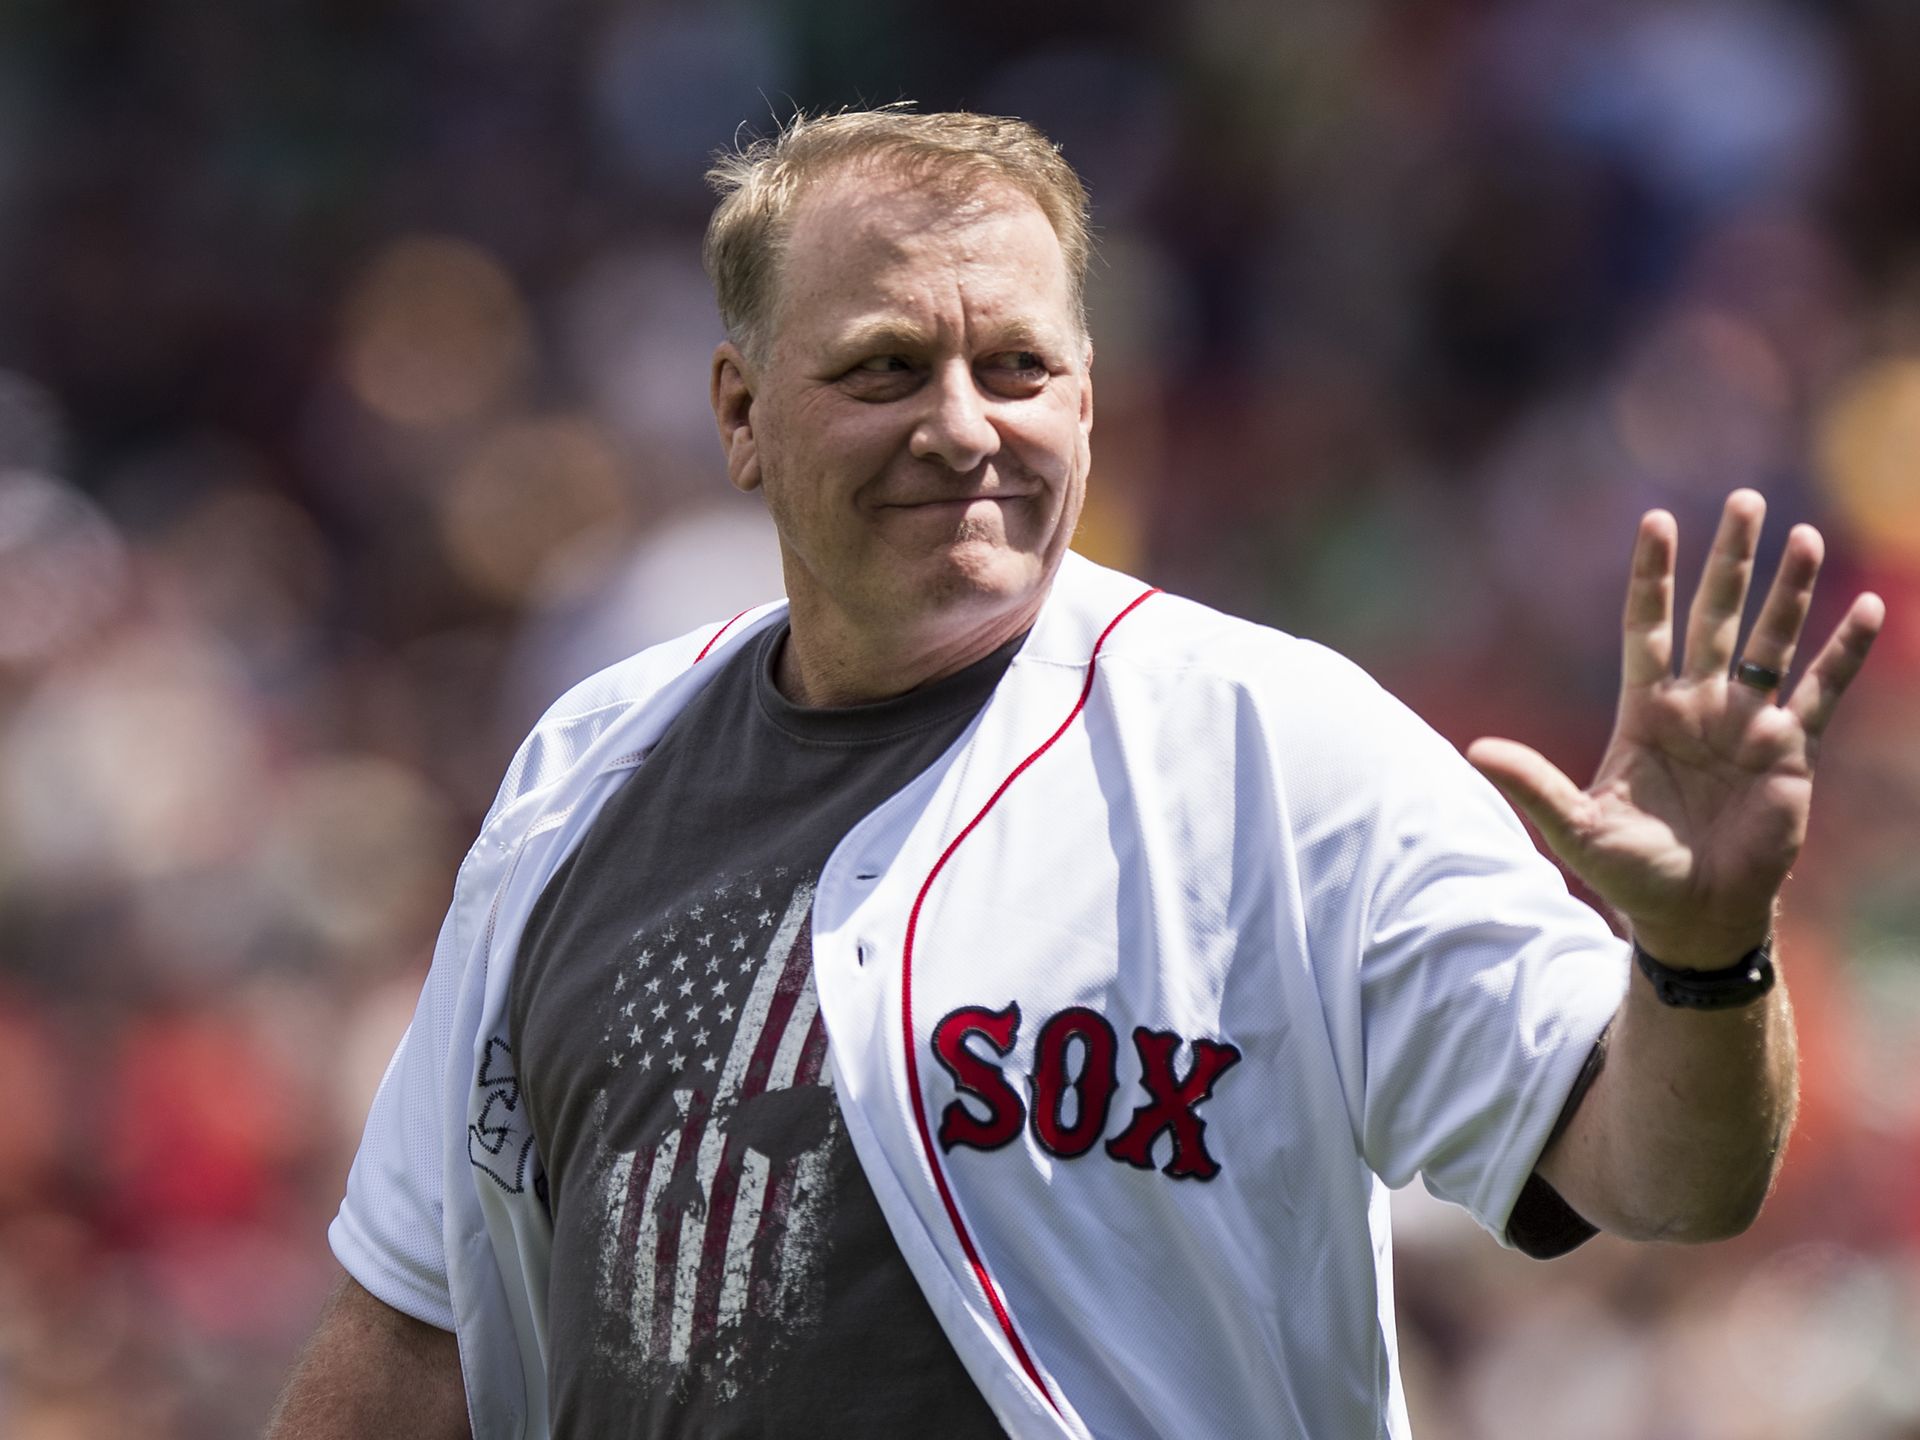 Curt Schilling asks to be removed from Hall of Fame contention after  character snub